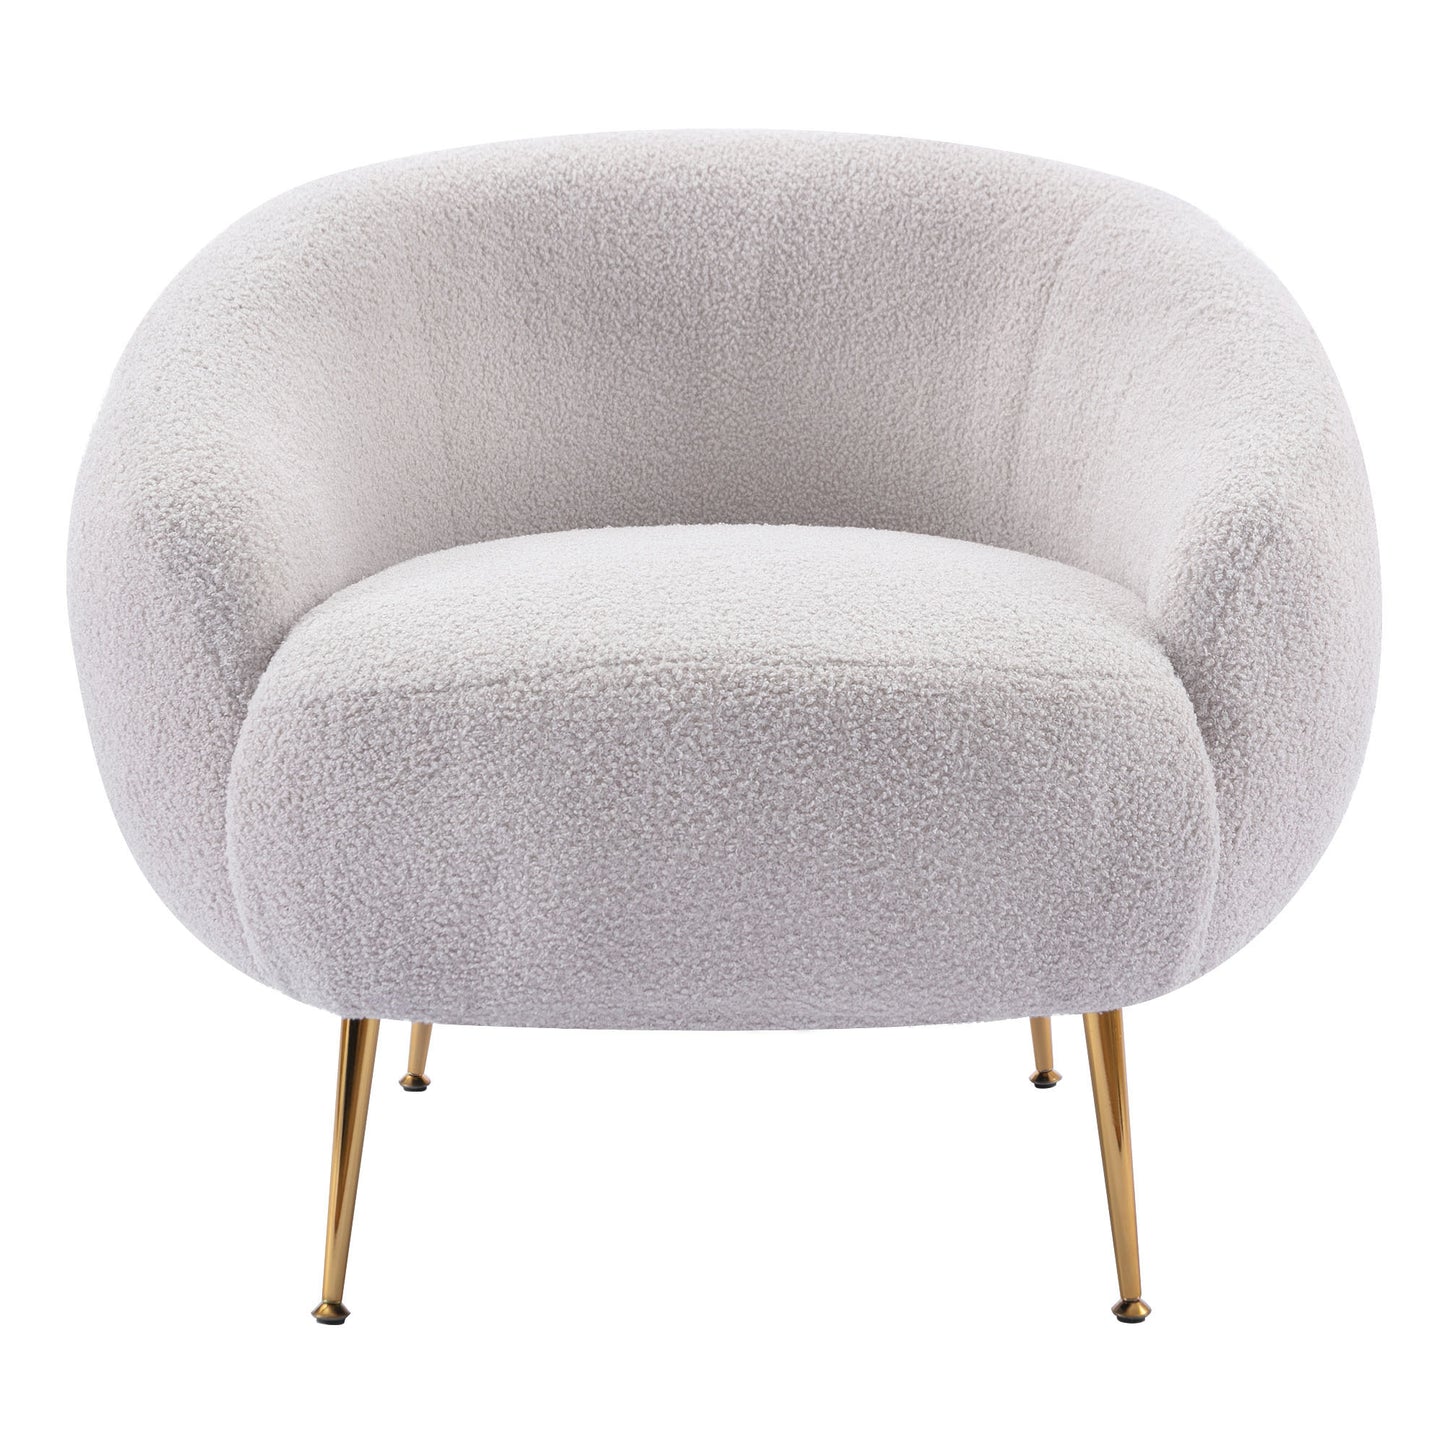 Modern Comfy Leisure Accent Chair, Teddy Short Plush Particle Velvet Armchair with Ottoman for Living Room